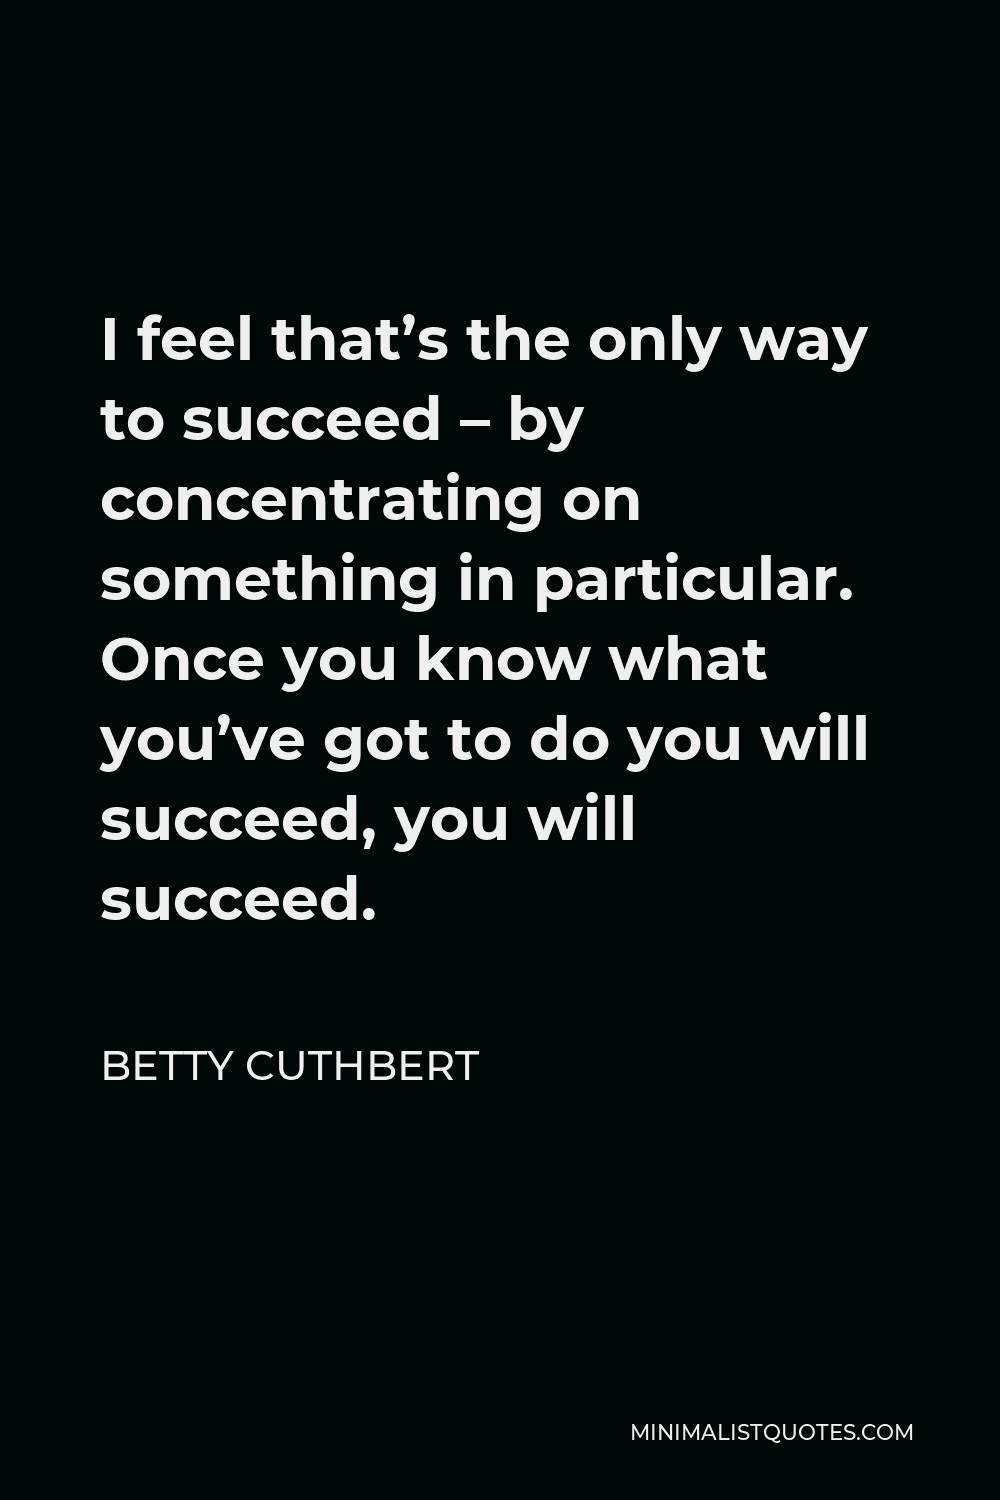 Betty Cuthbert Quote - I feel that’s the only way to succeed – by concentrating on something in particular. Once you know what you’ve got to do you will succeed, you will succeed.